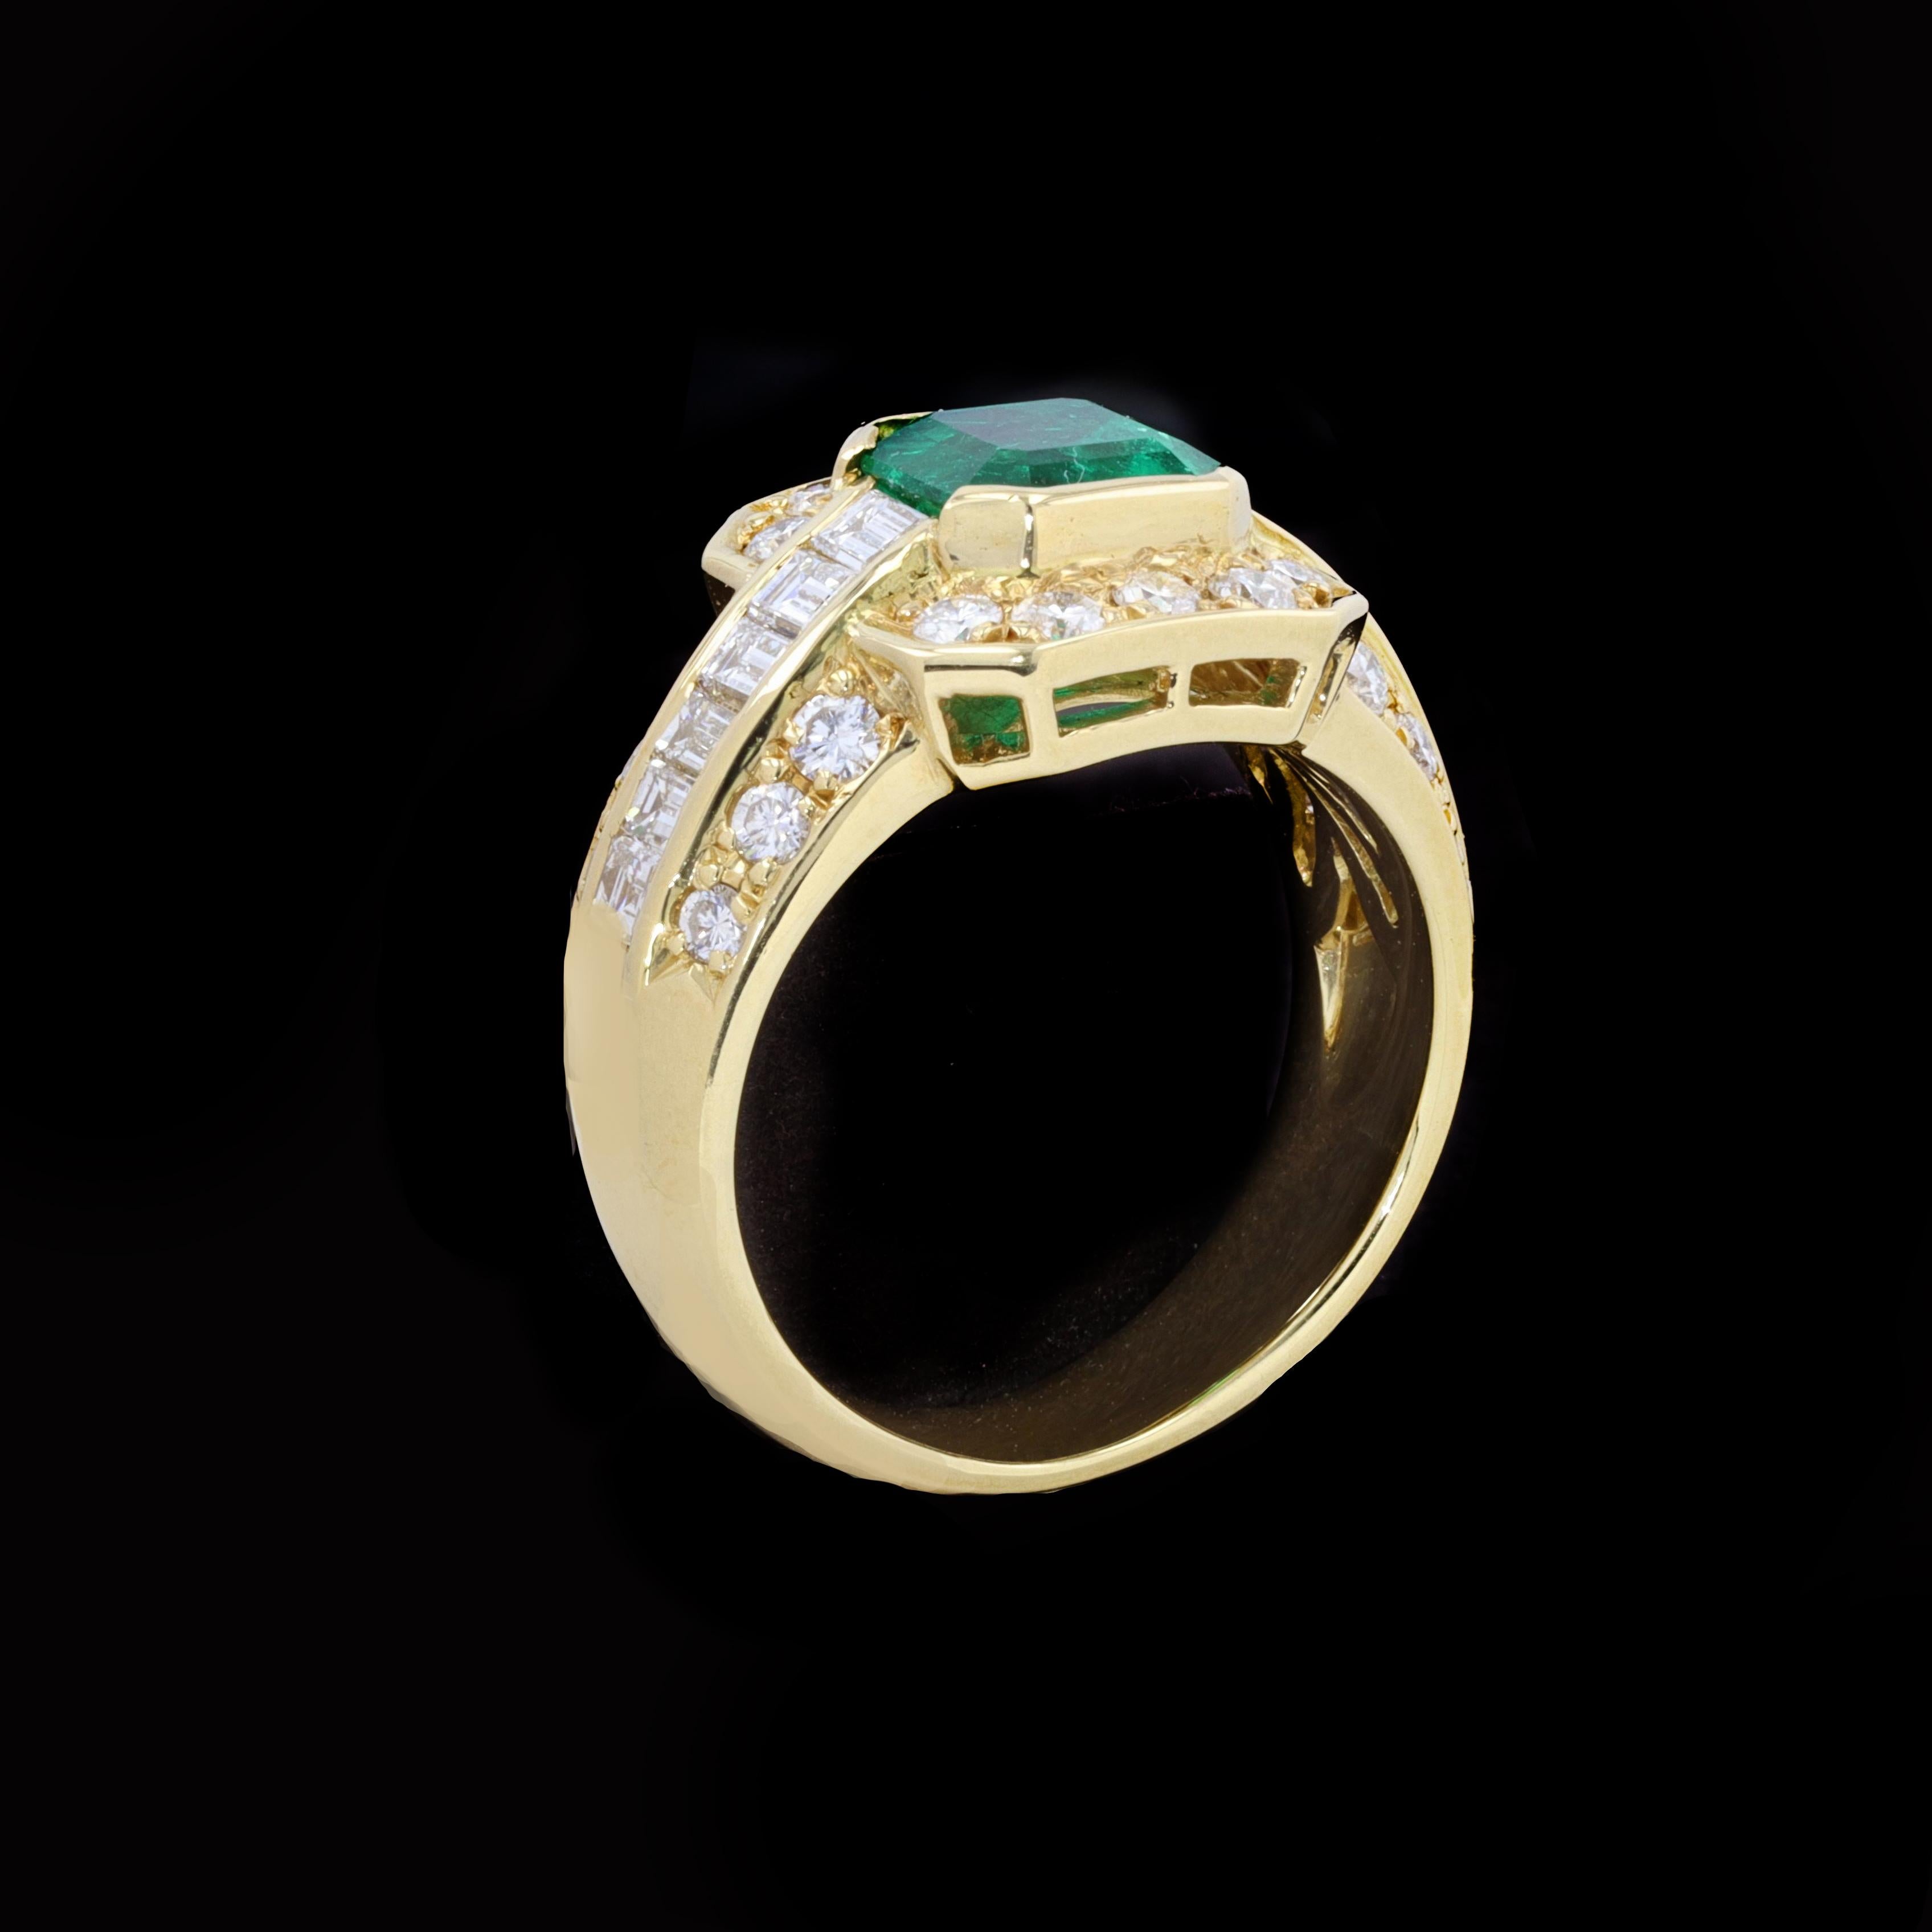 Centered with a lovely emerald cut Colombian emerald, and surrounded by shimmering diamonds, this 18K yellow gold estate ring is a perfect combination of timeless fashion and style. The emerald is accentuated by sparkling round and baguette cut